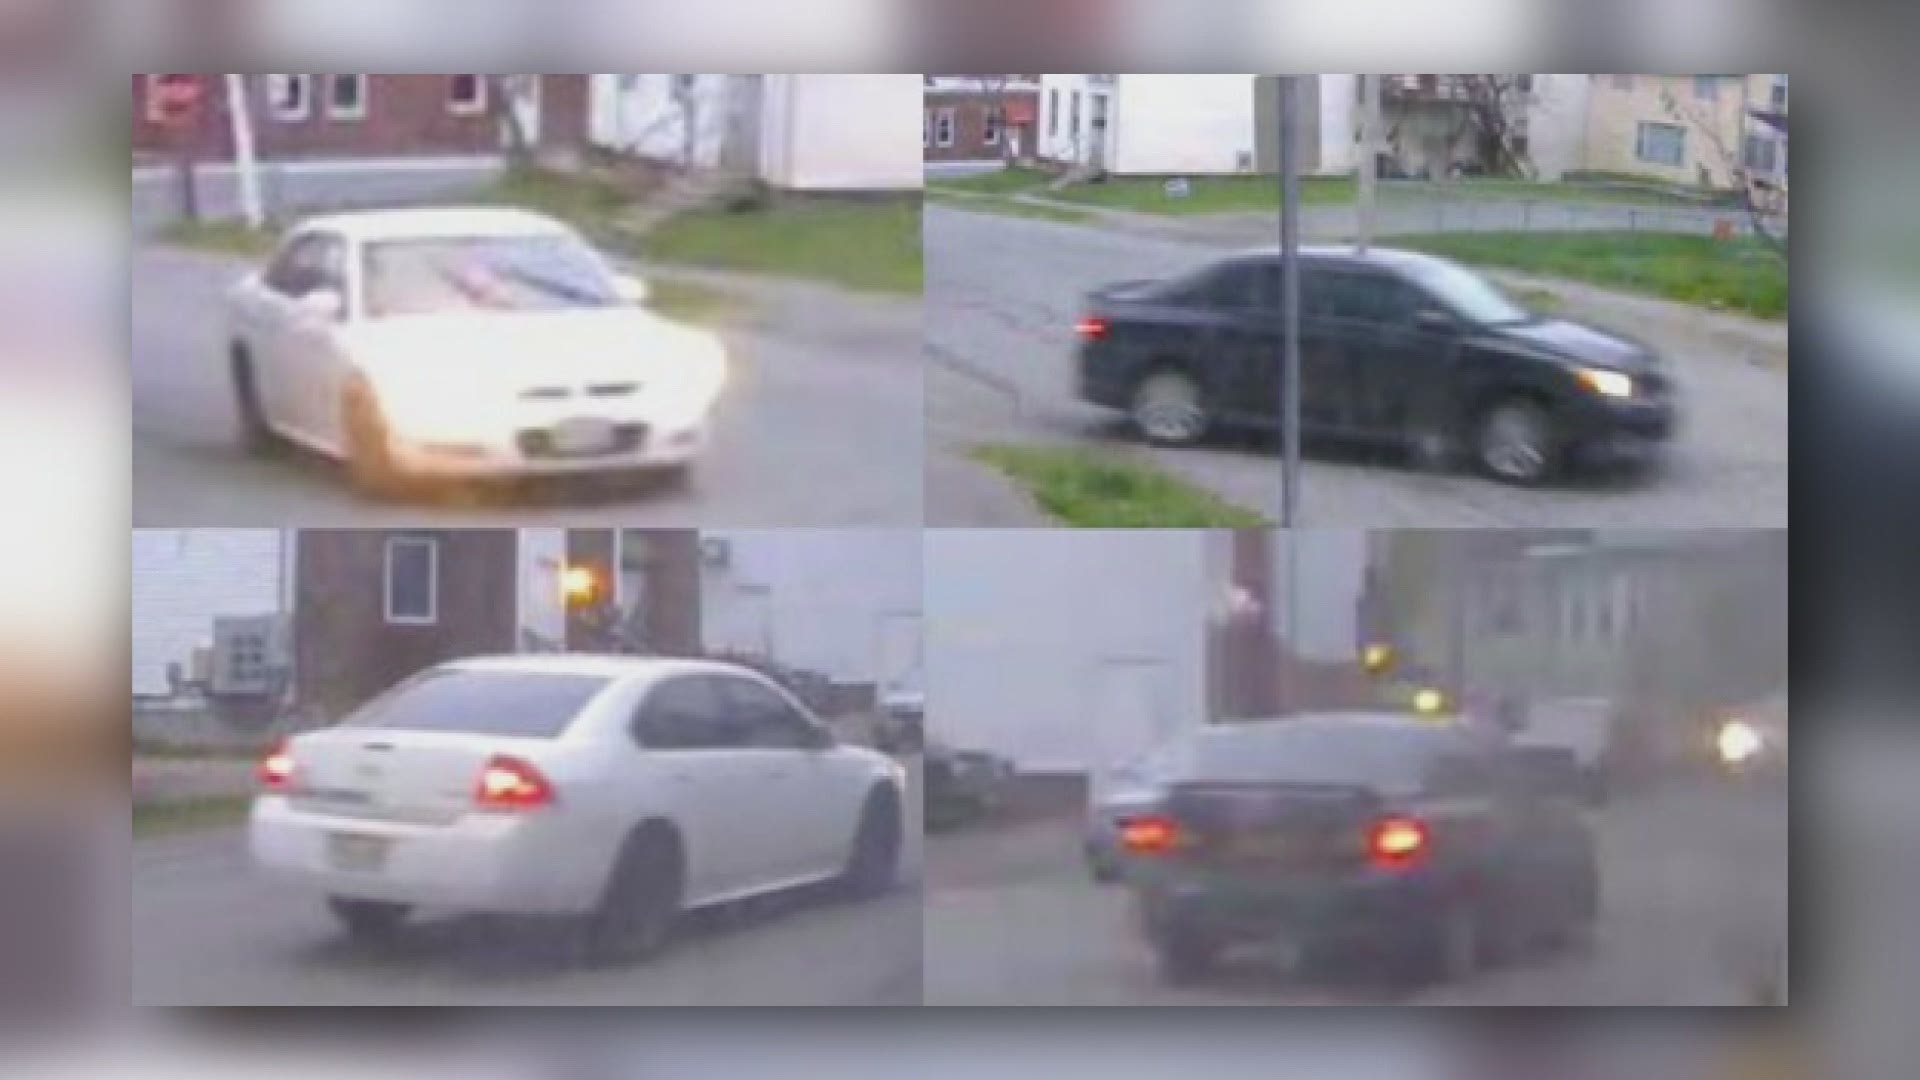 The Bangor Police Department is looking for the owners of two sedans in connection with gunshots near York Street and Essex street.